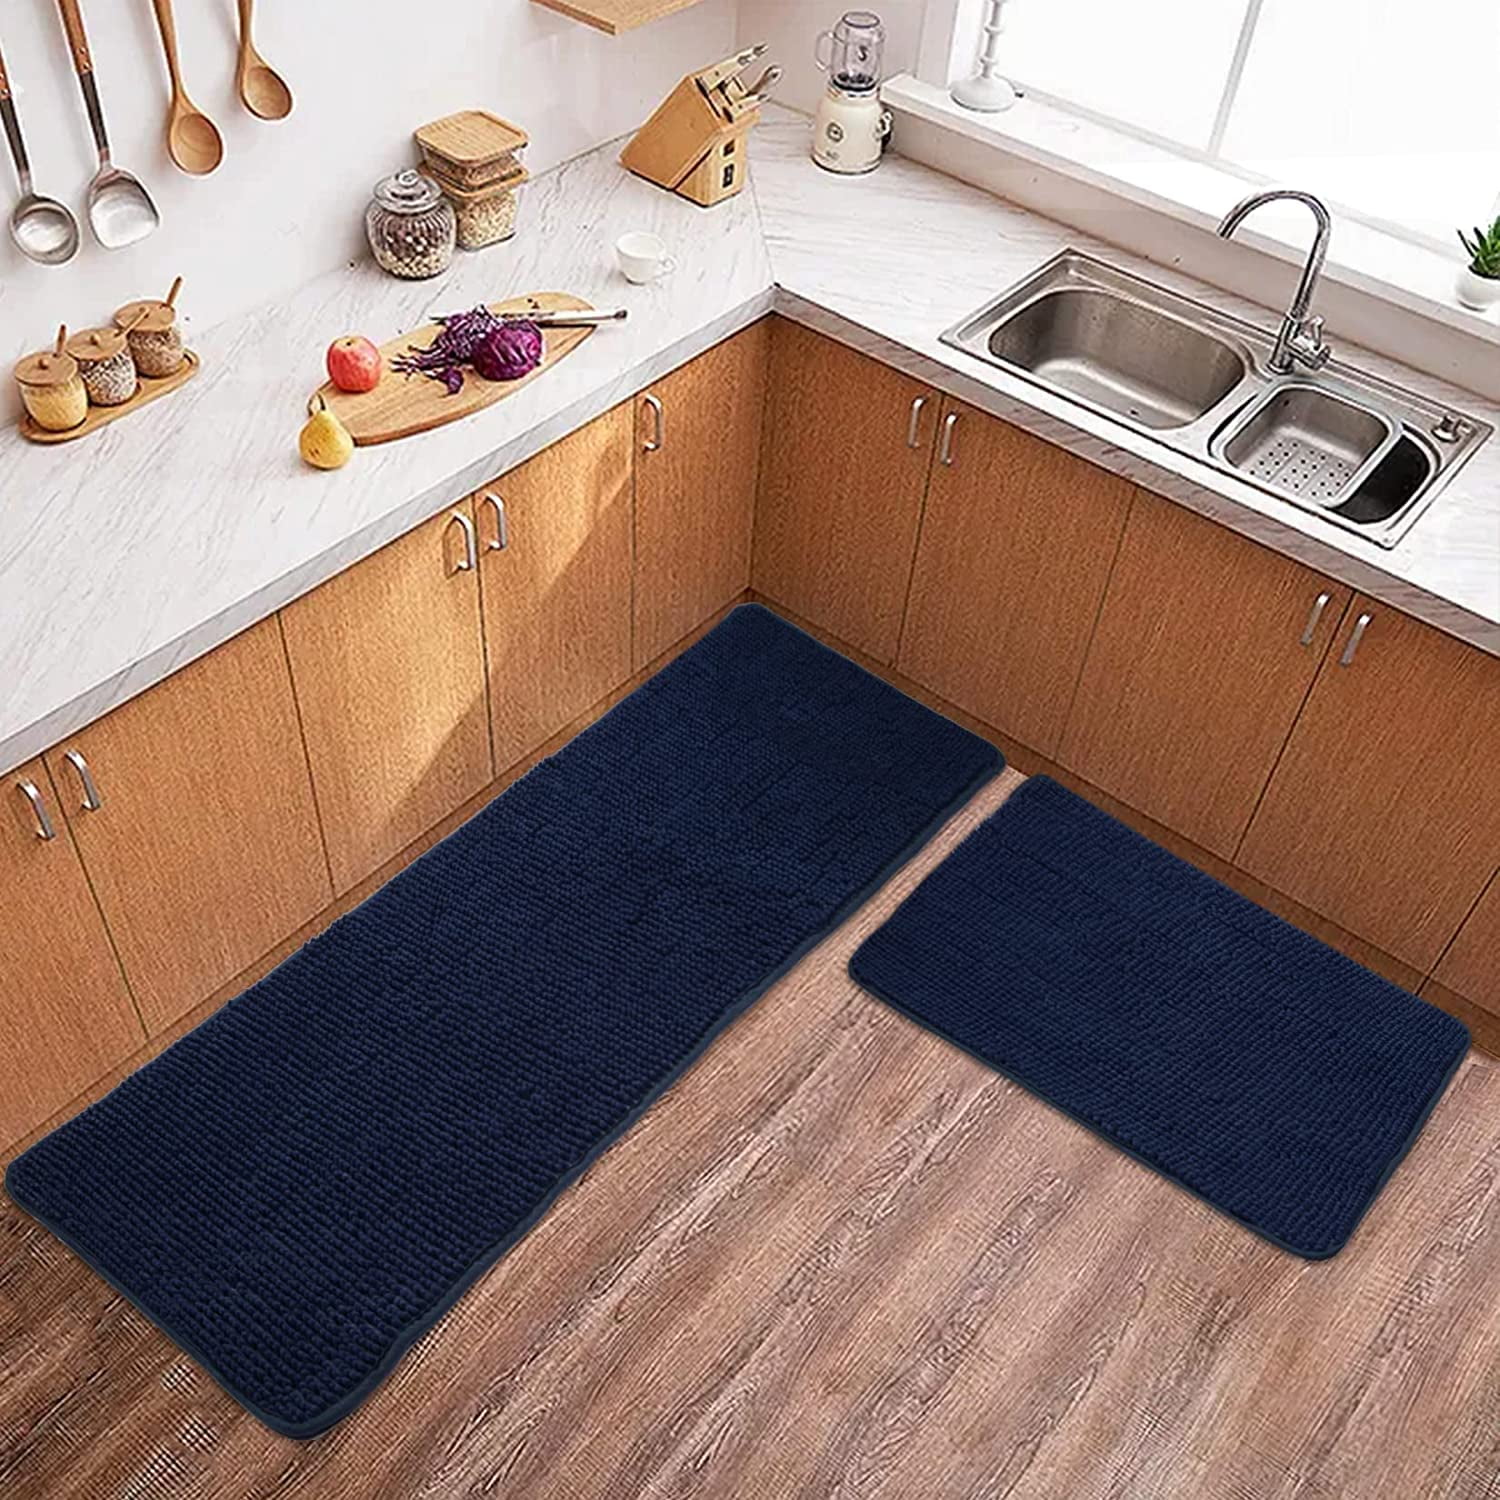 BxzanDya Kitchen Rugs and Mats Non Skid Washable, for Kitchen Sink Side  Mats, Aisle Rugs, Hallway Rugs 20x64…